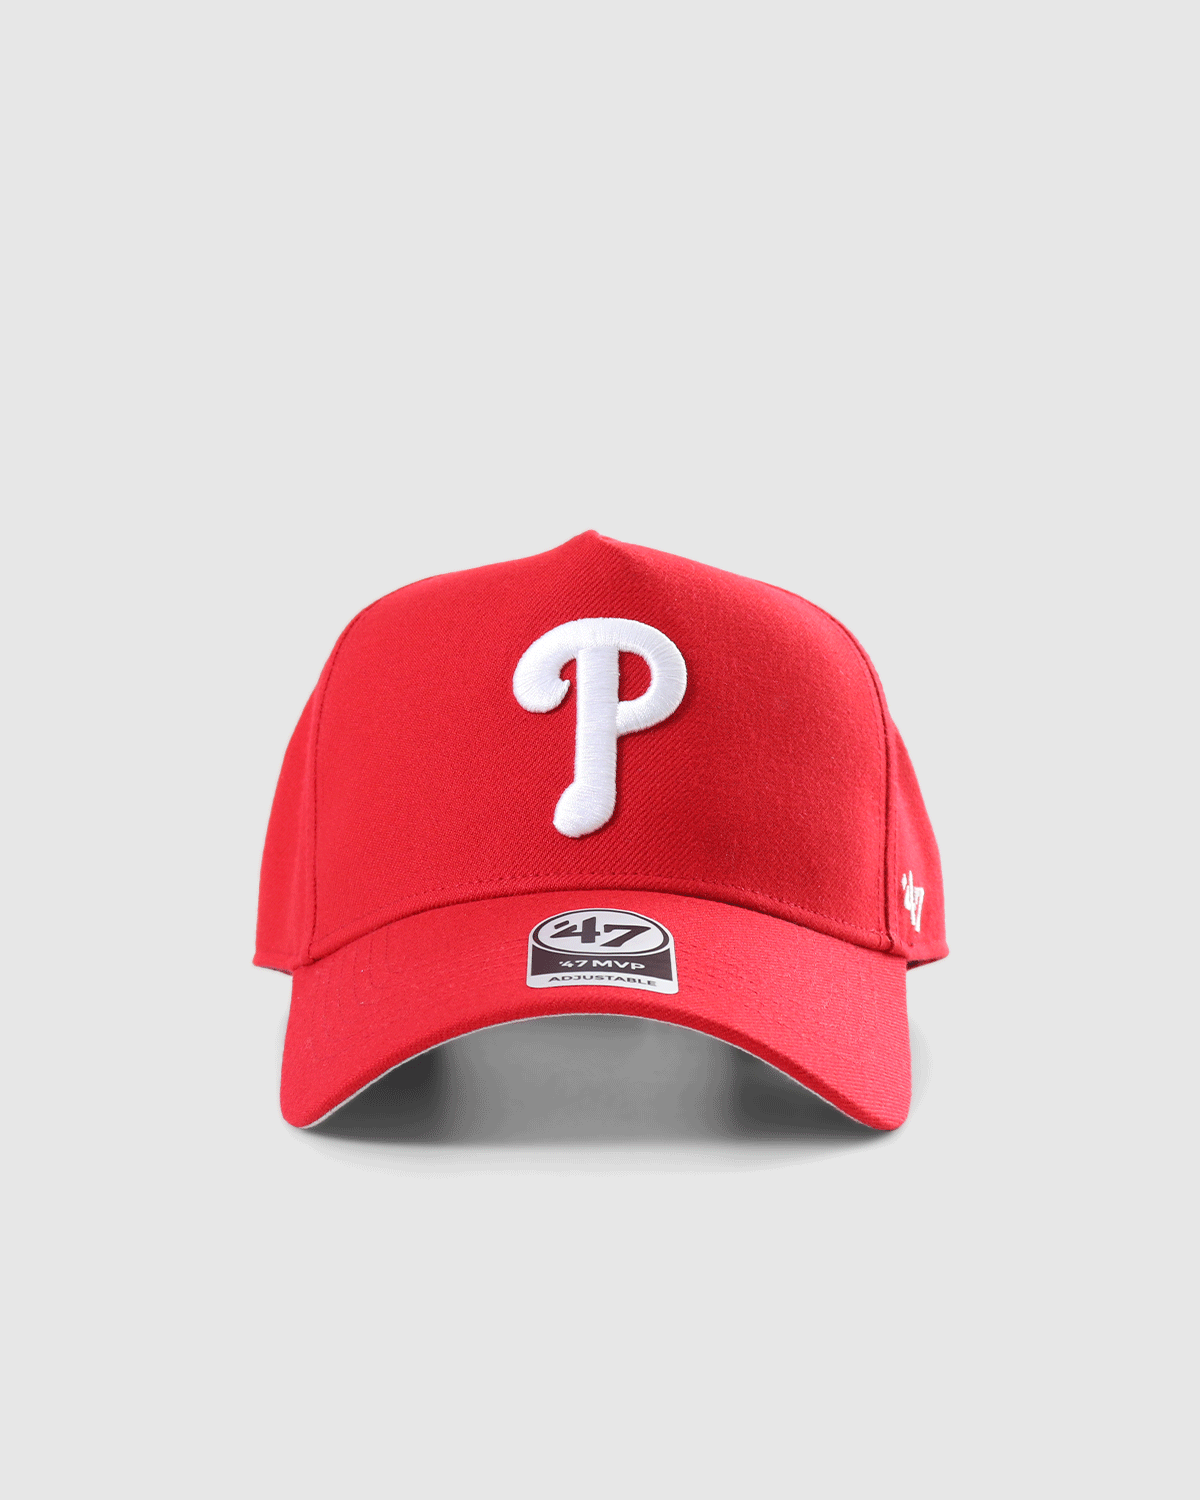 47 Brand Carhartt Phillies Adult One Size Fits All Other Hat